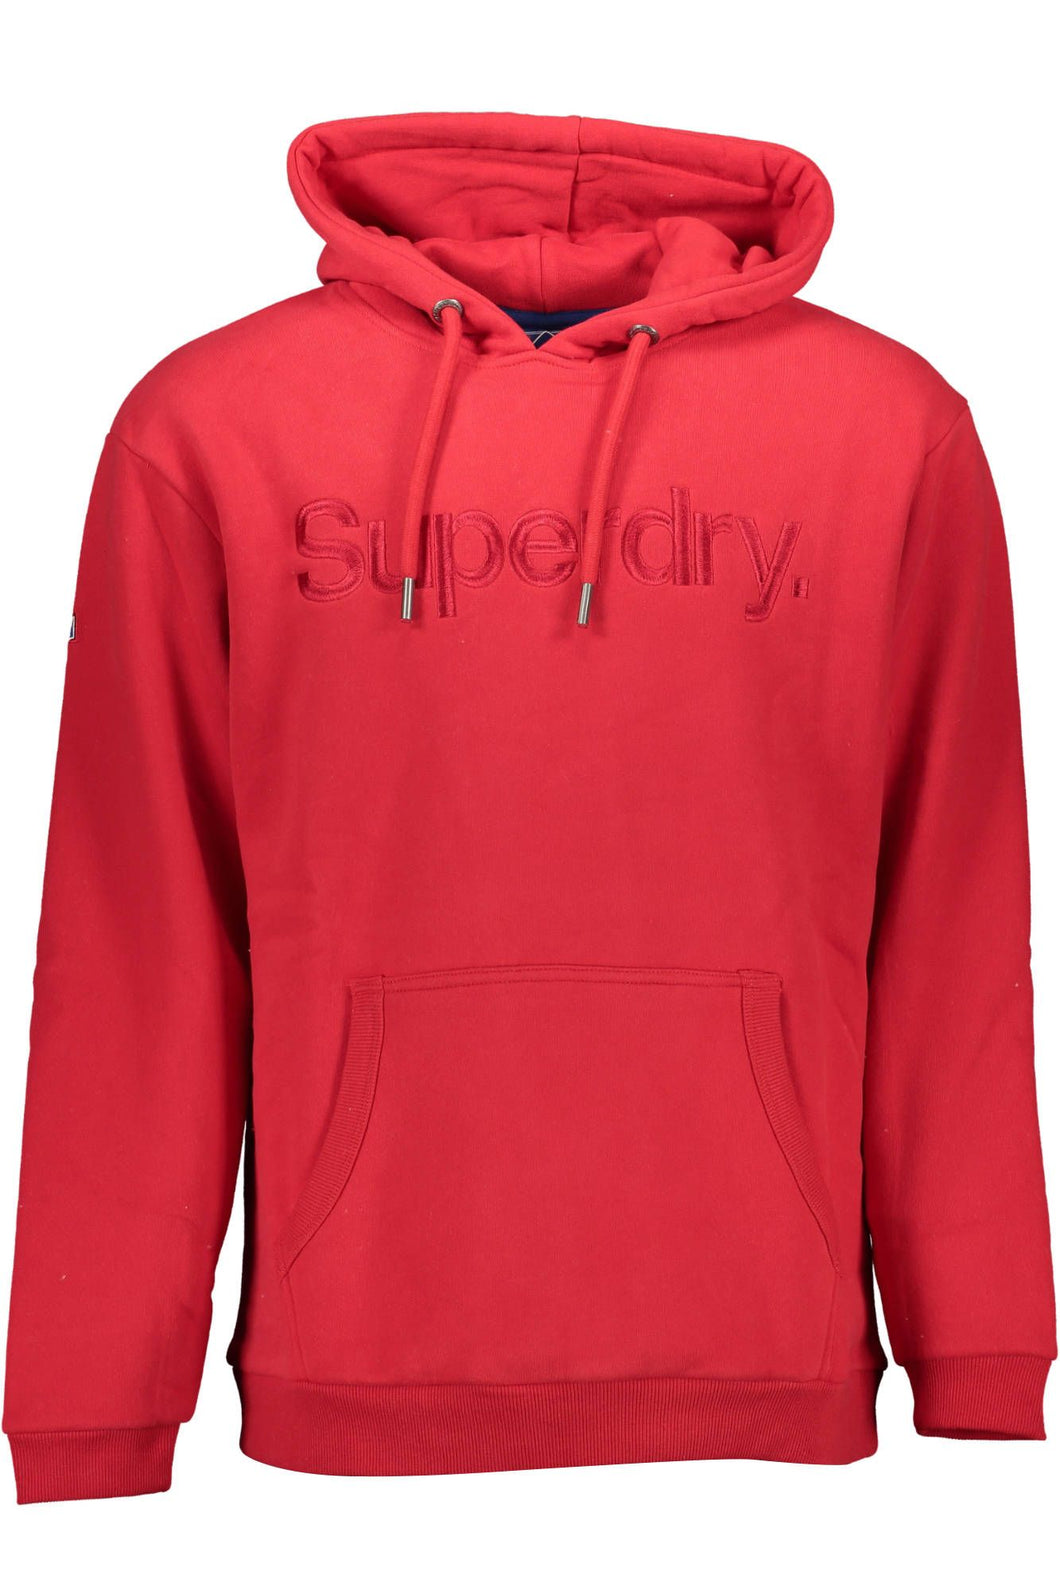 Superdry Red Cotton Sweater